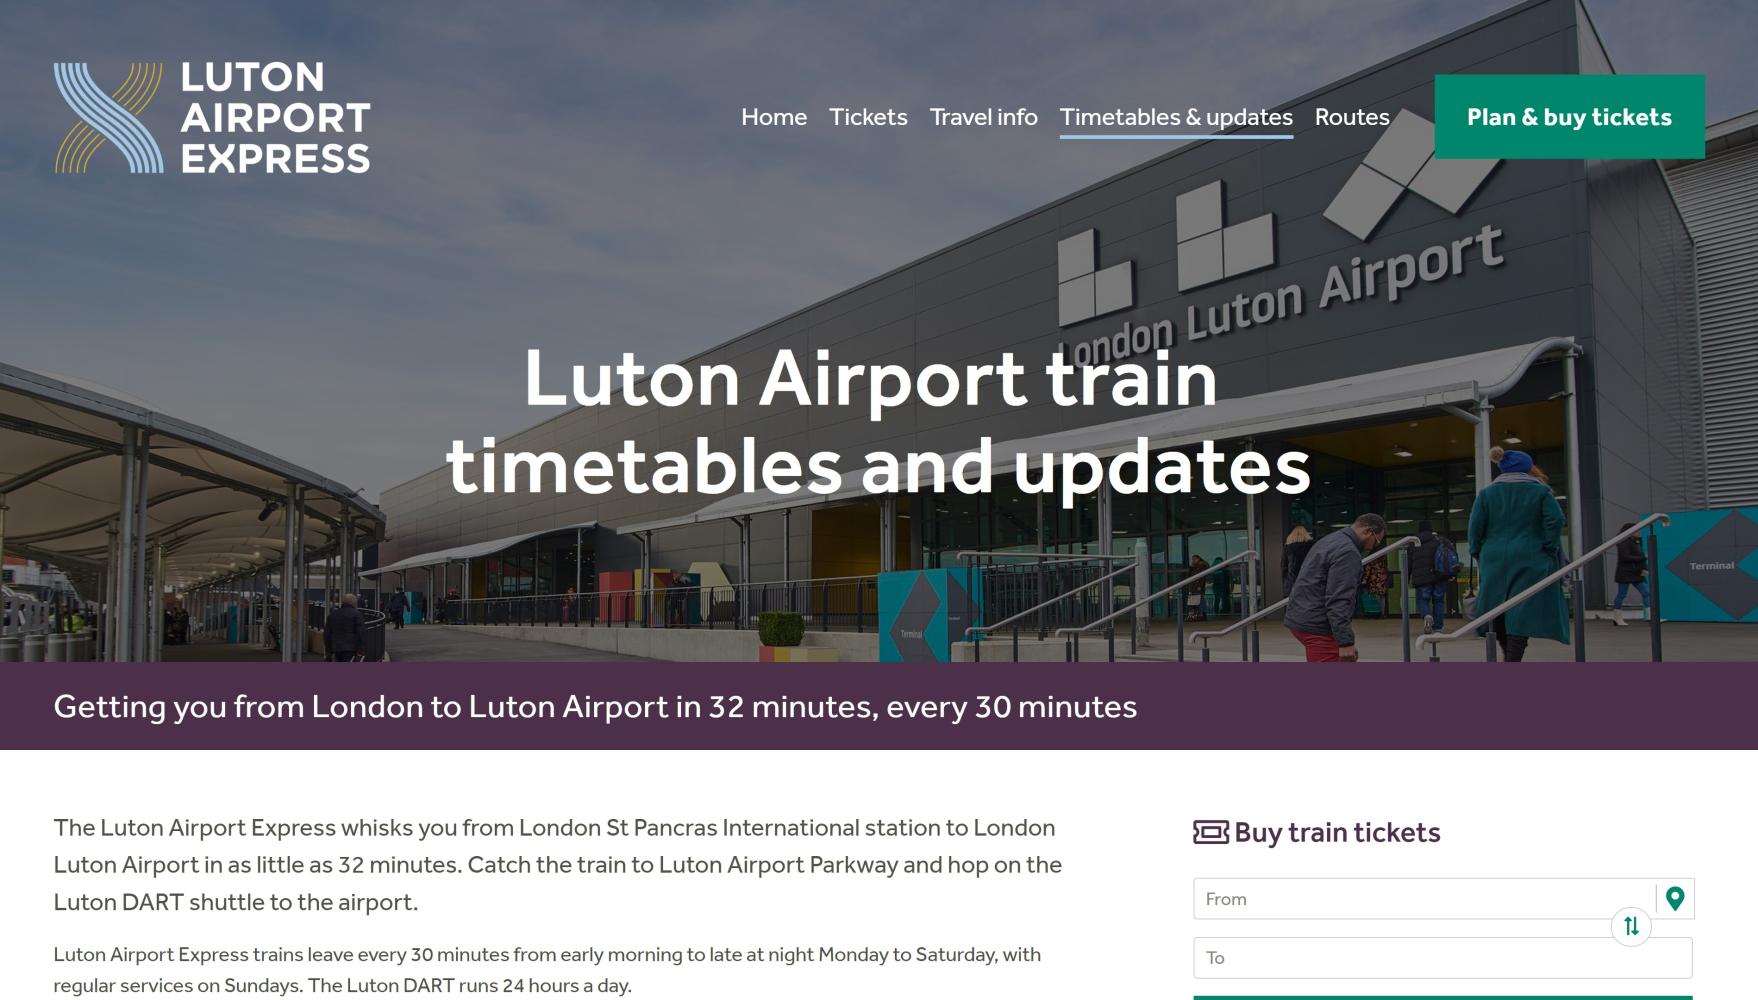 Luton Airport Express - Inner page